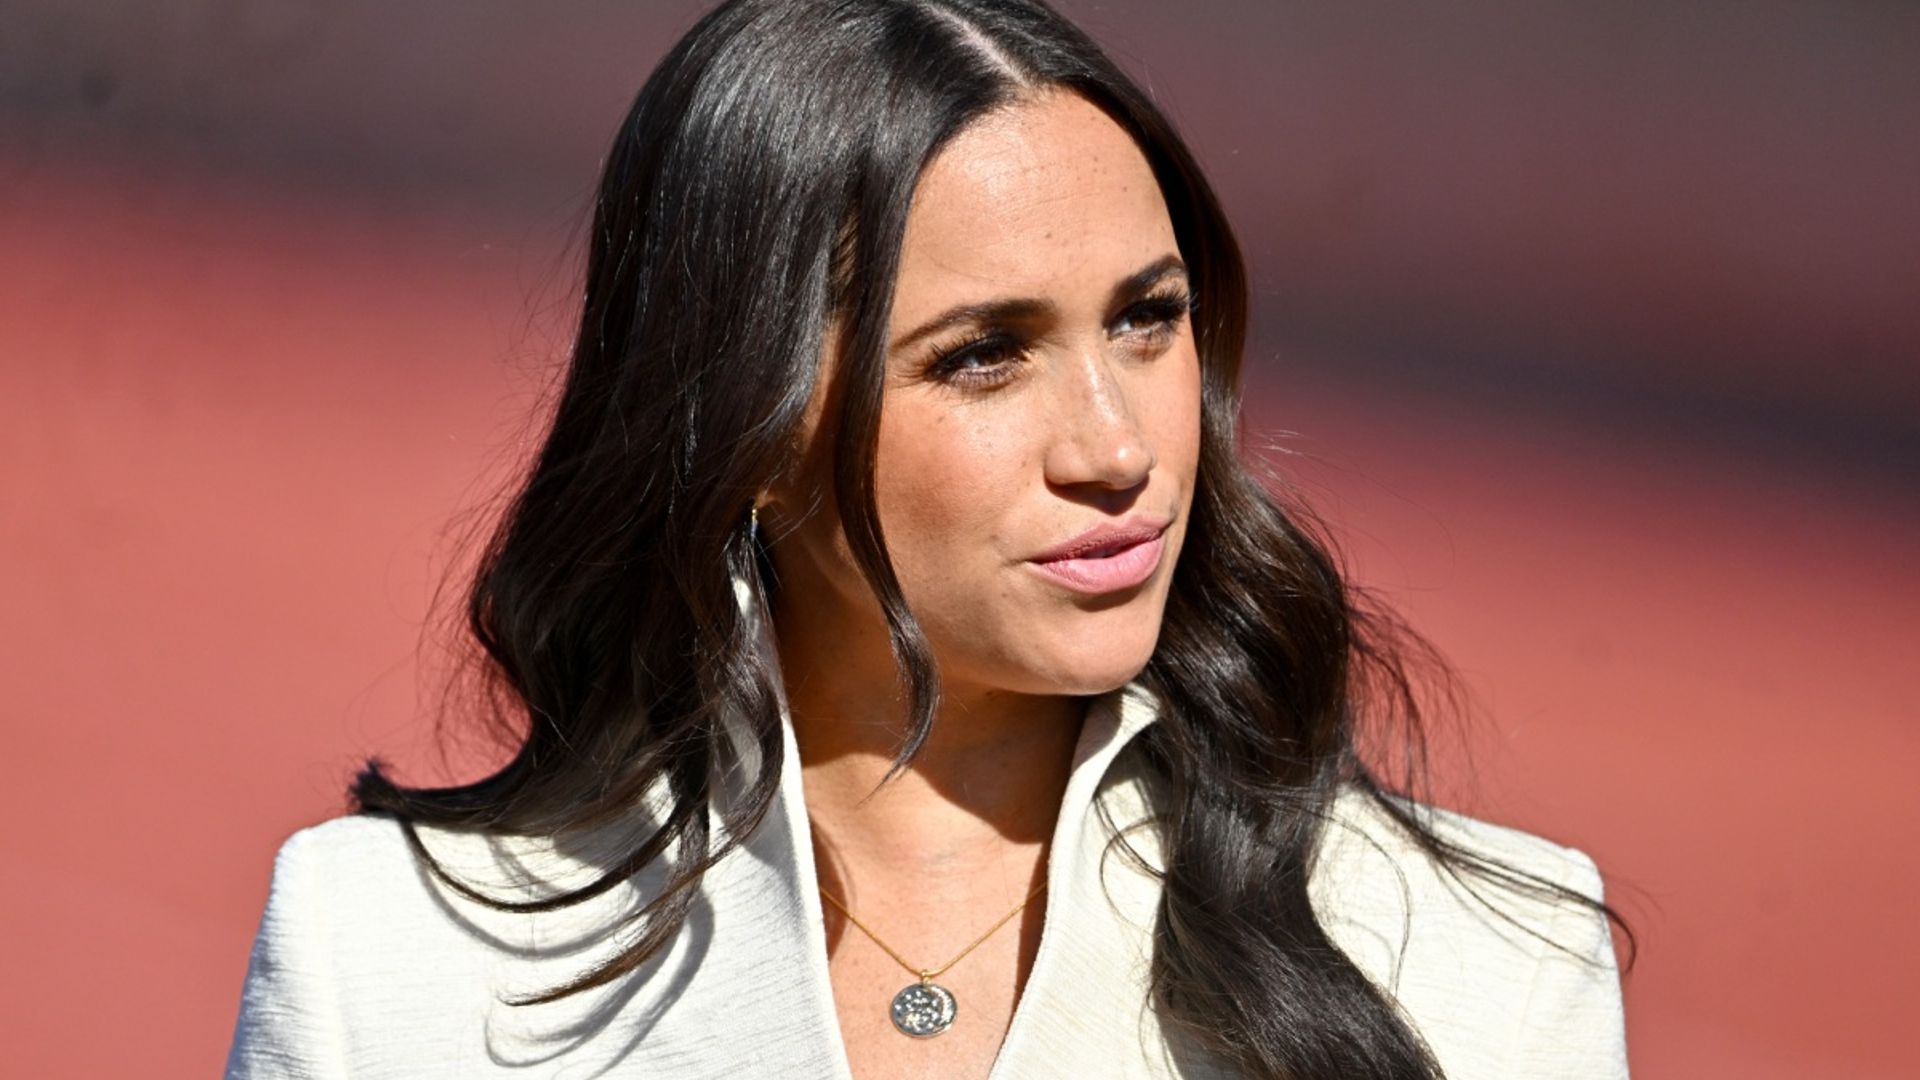 Meghan Markle praises 'working moms' in emotional new message